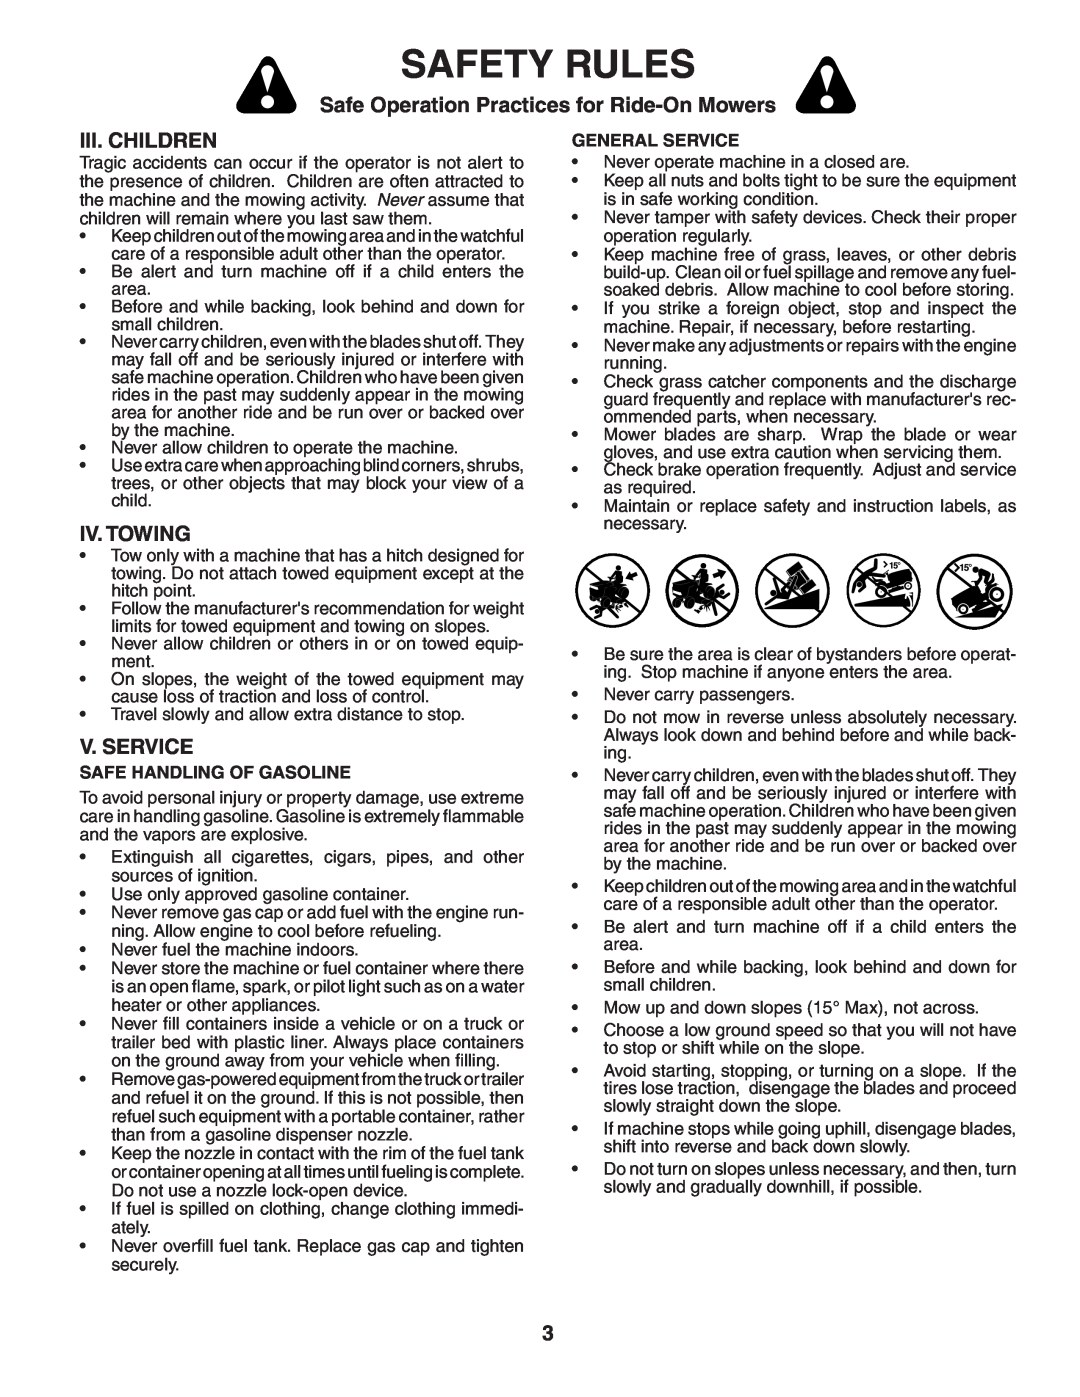 Poulan HD20H42 manual Iii. Children, Iv. Towing, V. Service, Safety Rules, Safe Operation Practices for Ride-On Mowers 